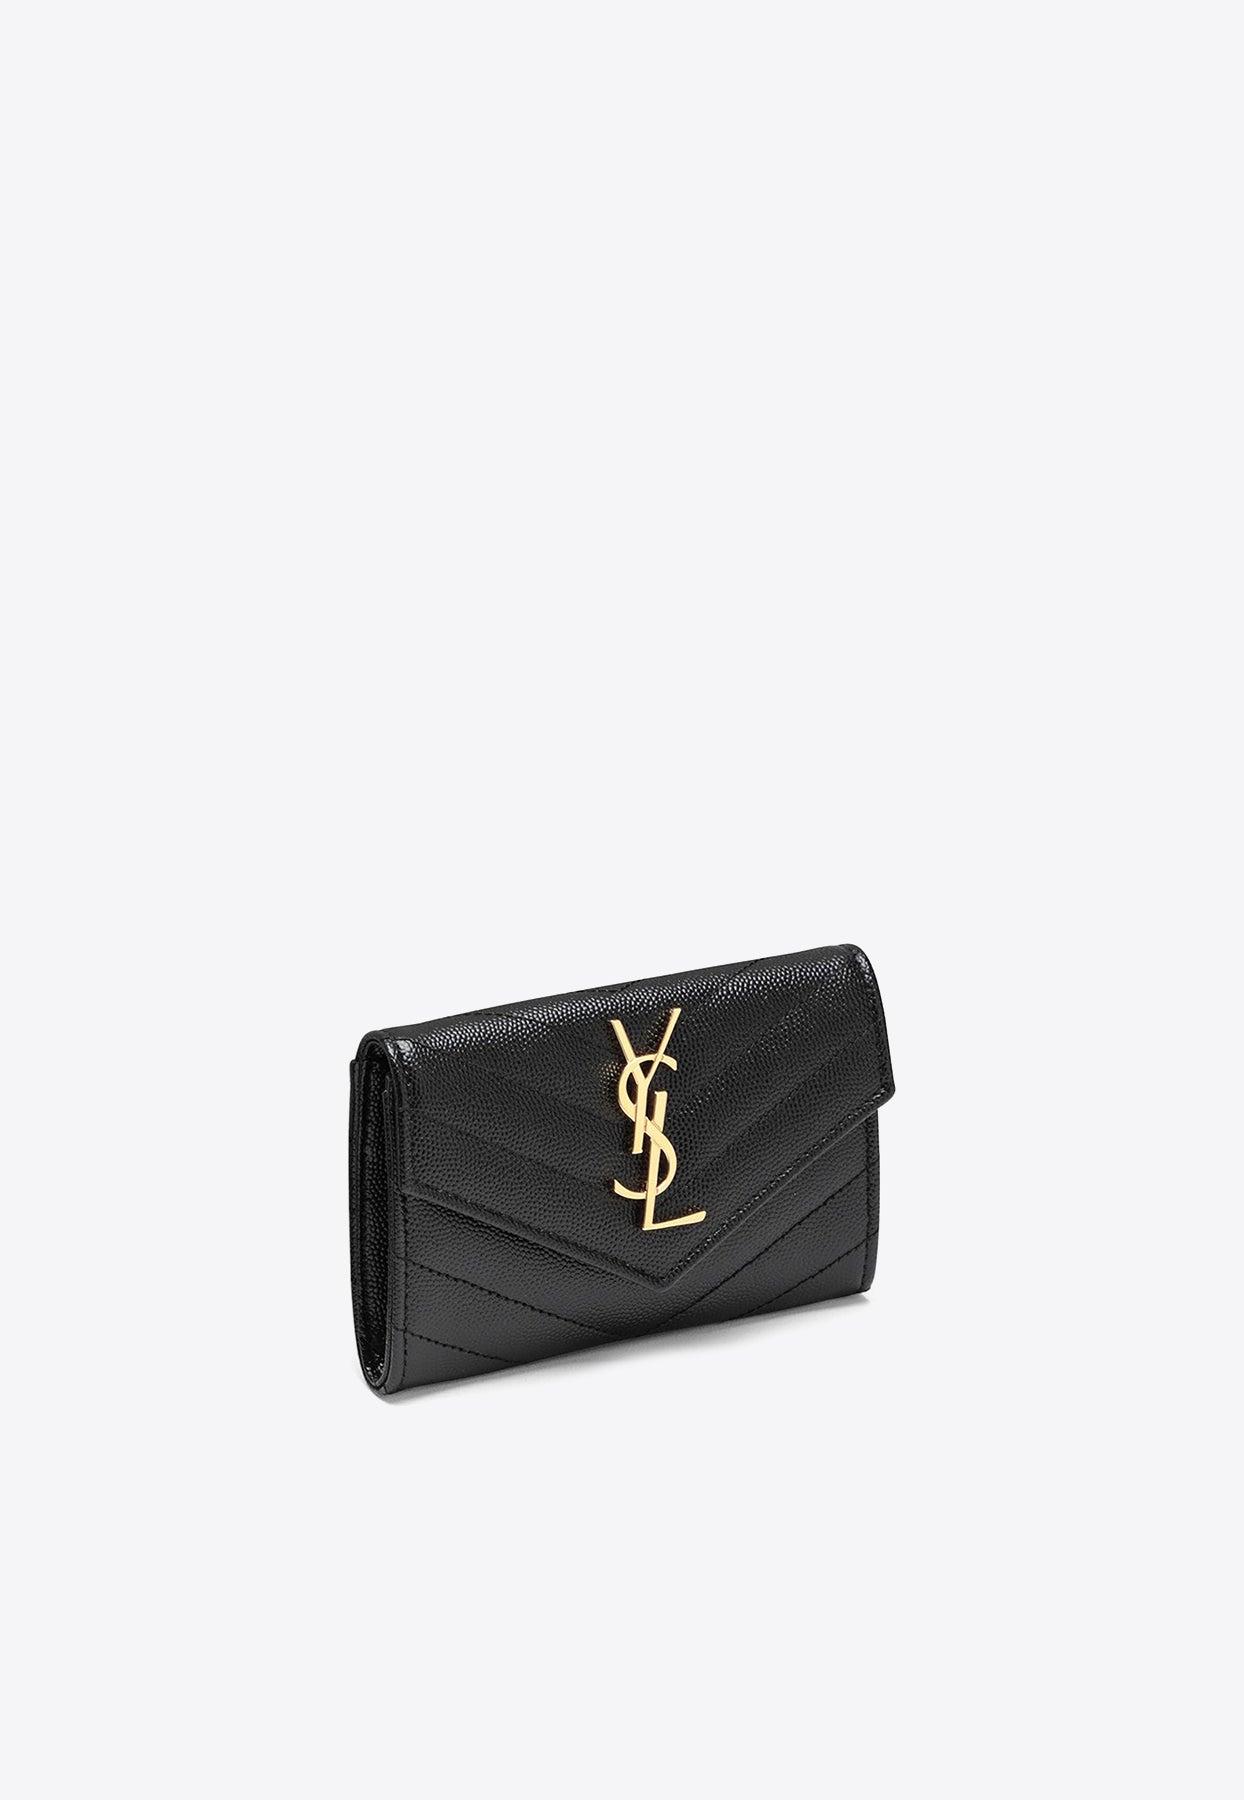 SAINT LAURENT Monogramme quilted textured-leather wallet